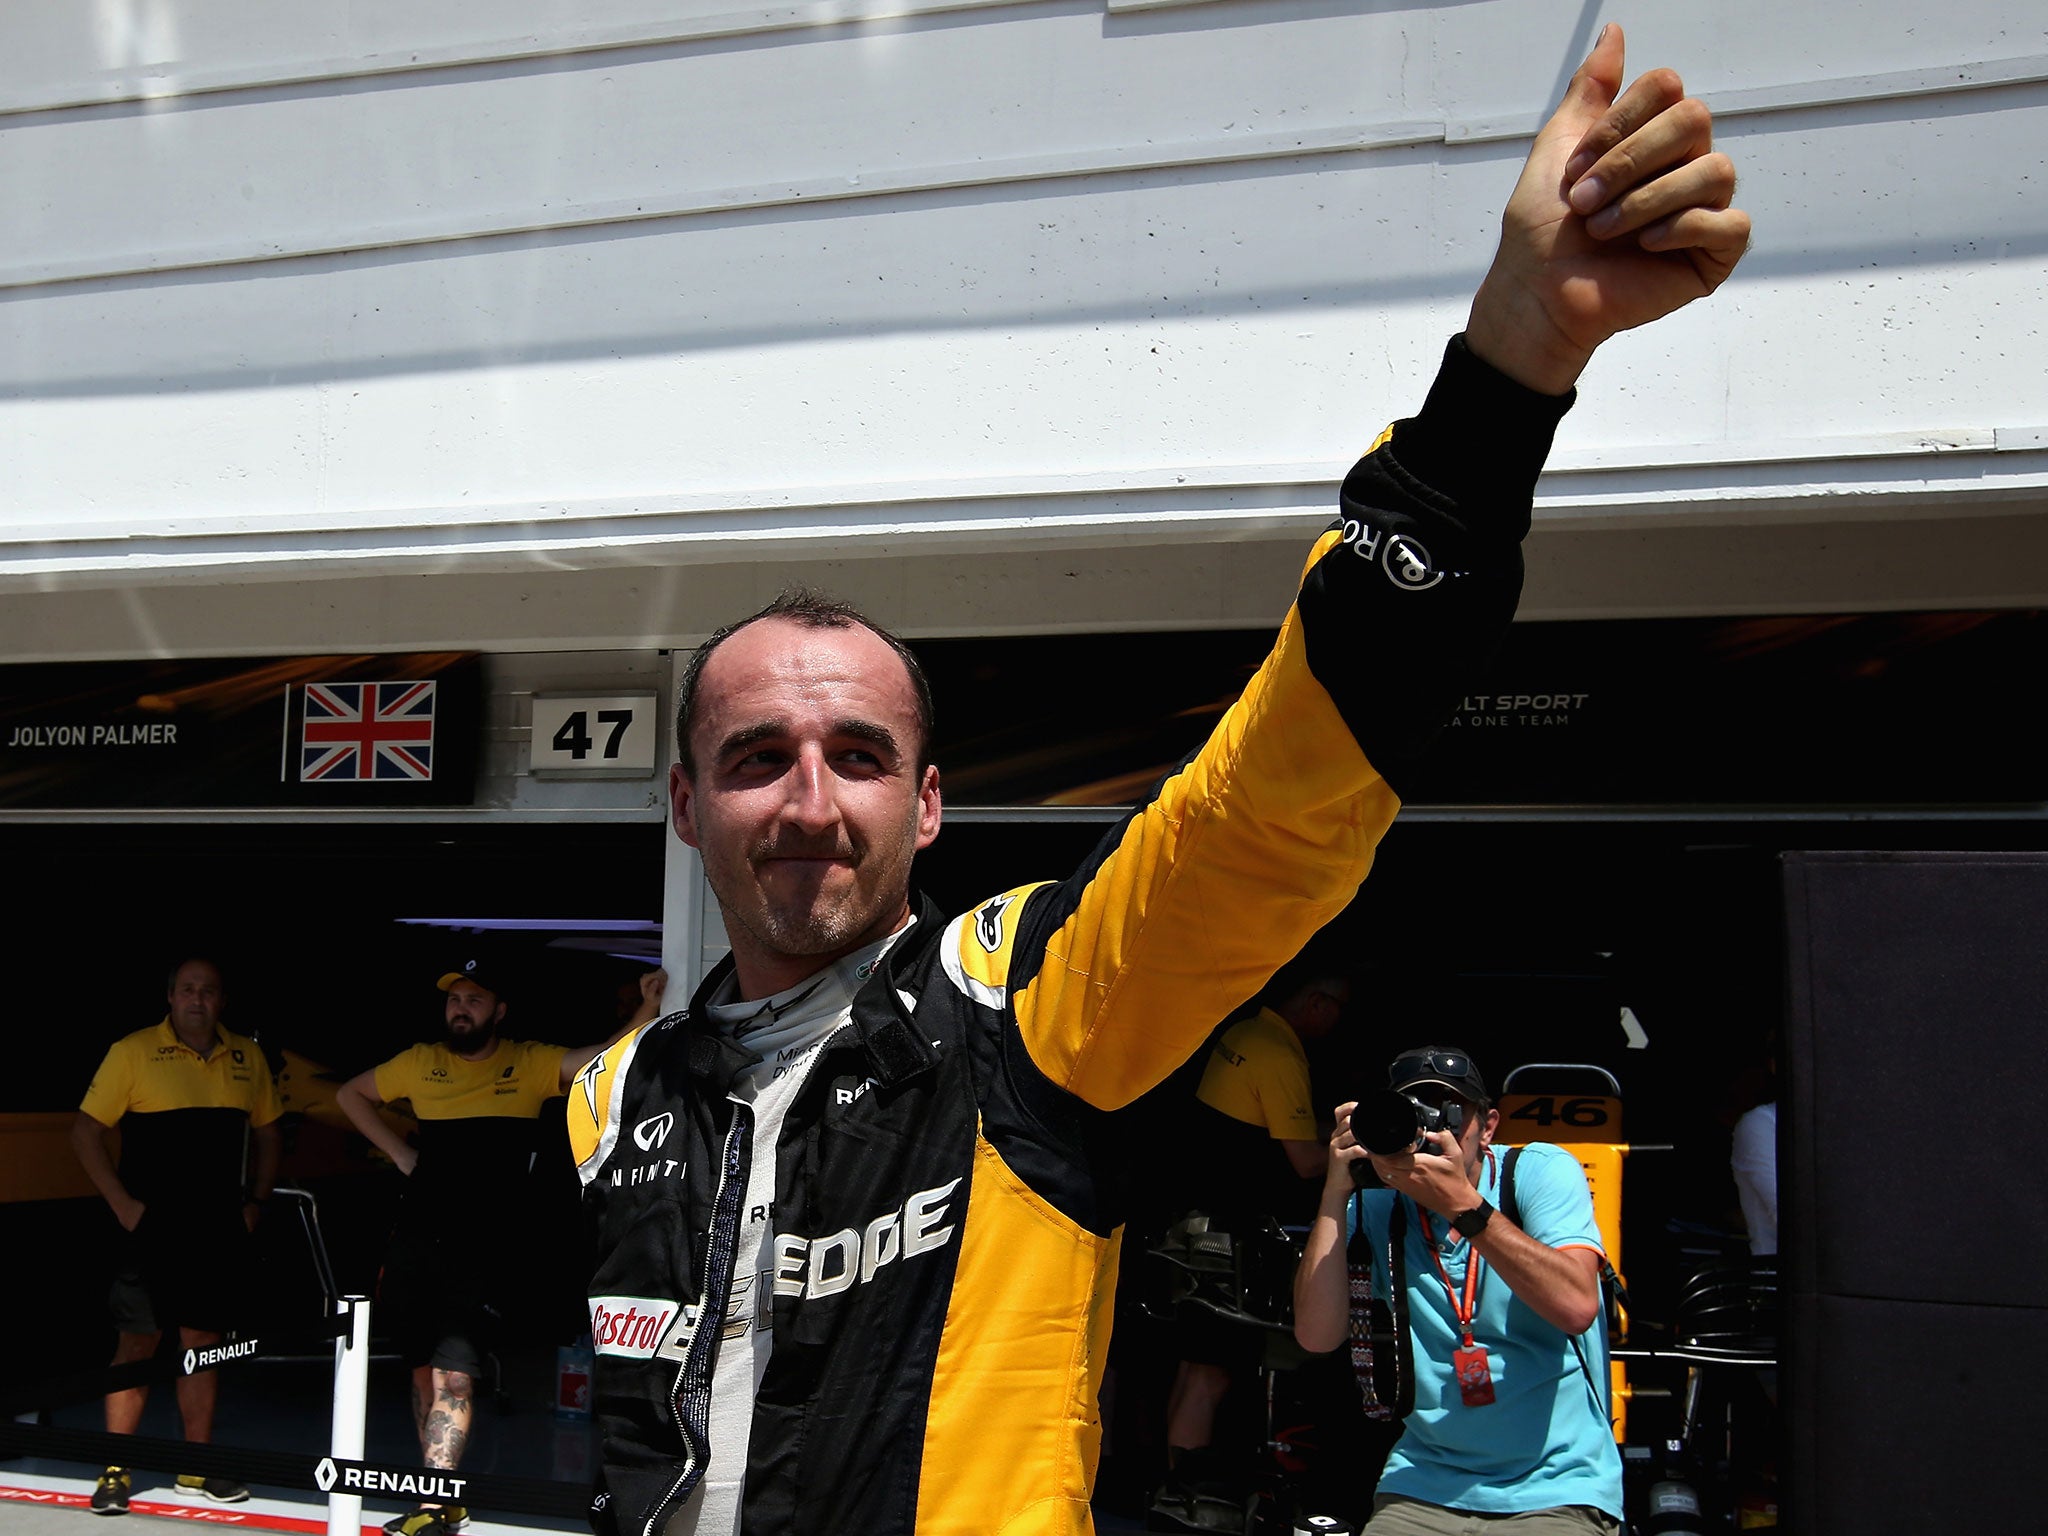 Robert Kubica waves to the crowd from the pit lane during day two at the Hungaroring